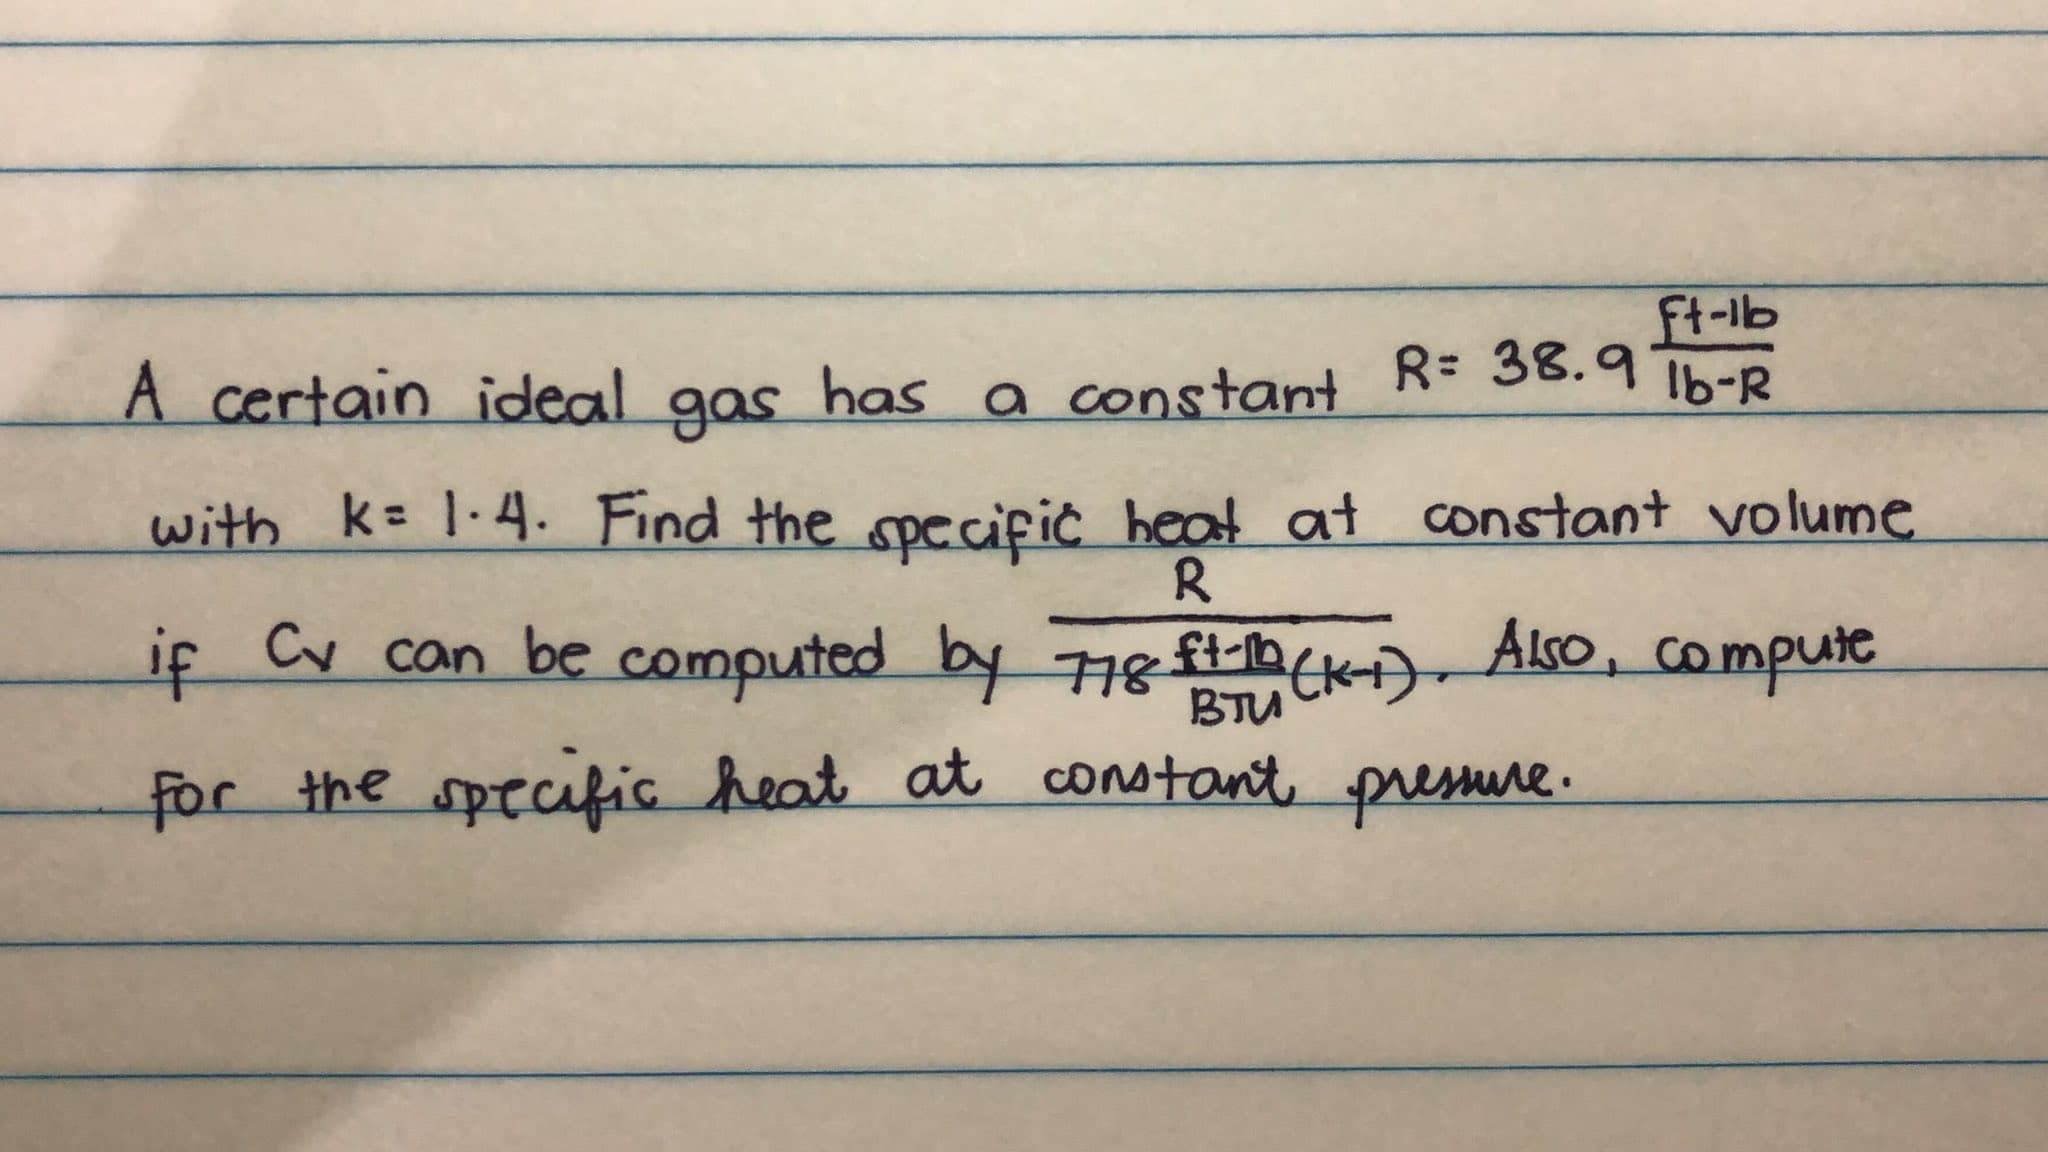 ft-lb
A certain ideal has a constant
gas
R= 38.9
Ib-R
with k= 1·4. Find the specific heat at constant volume
R.
if Cv can be computed by 78 t(k) Also, compute
BTU
for the specific heat at constant pressure.
